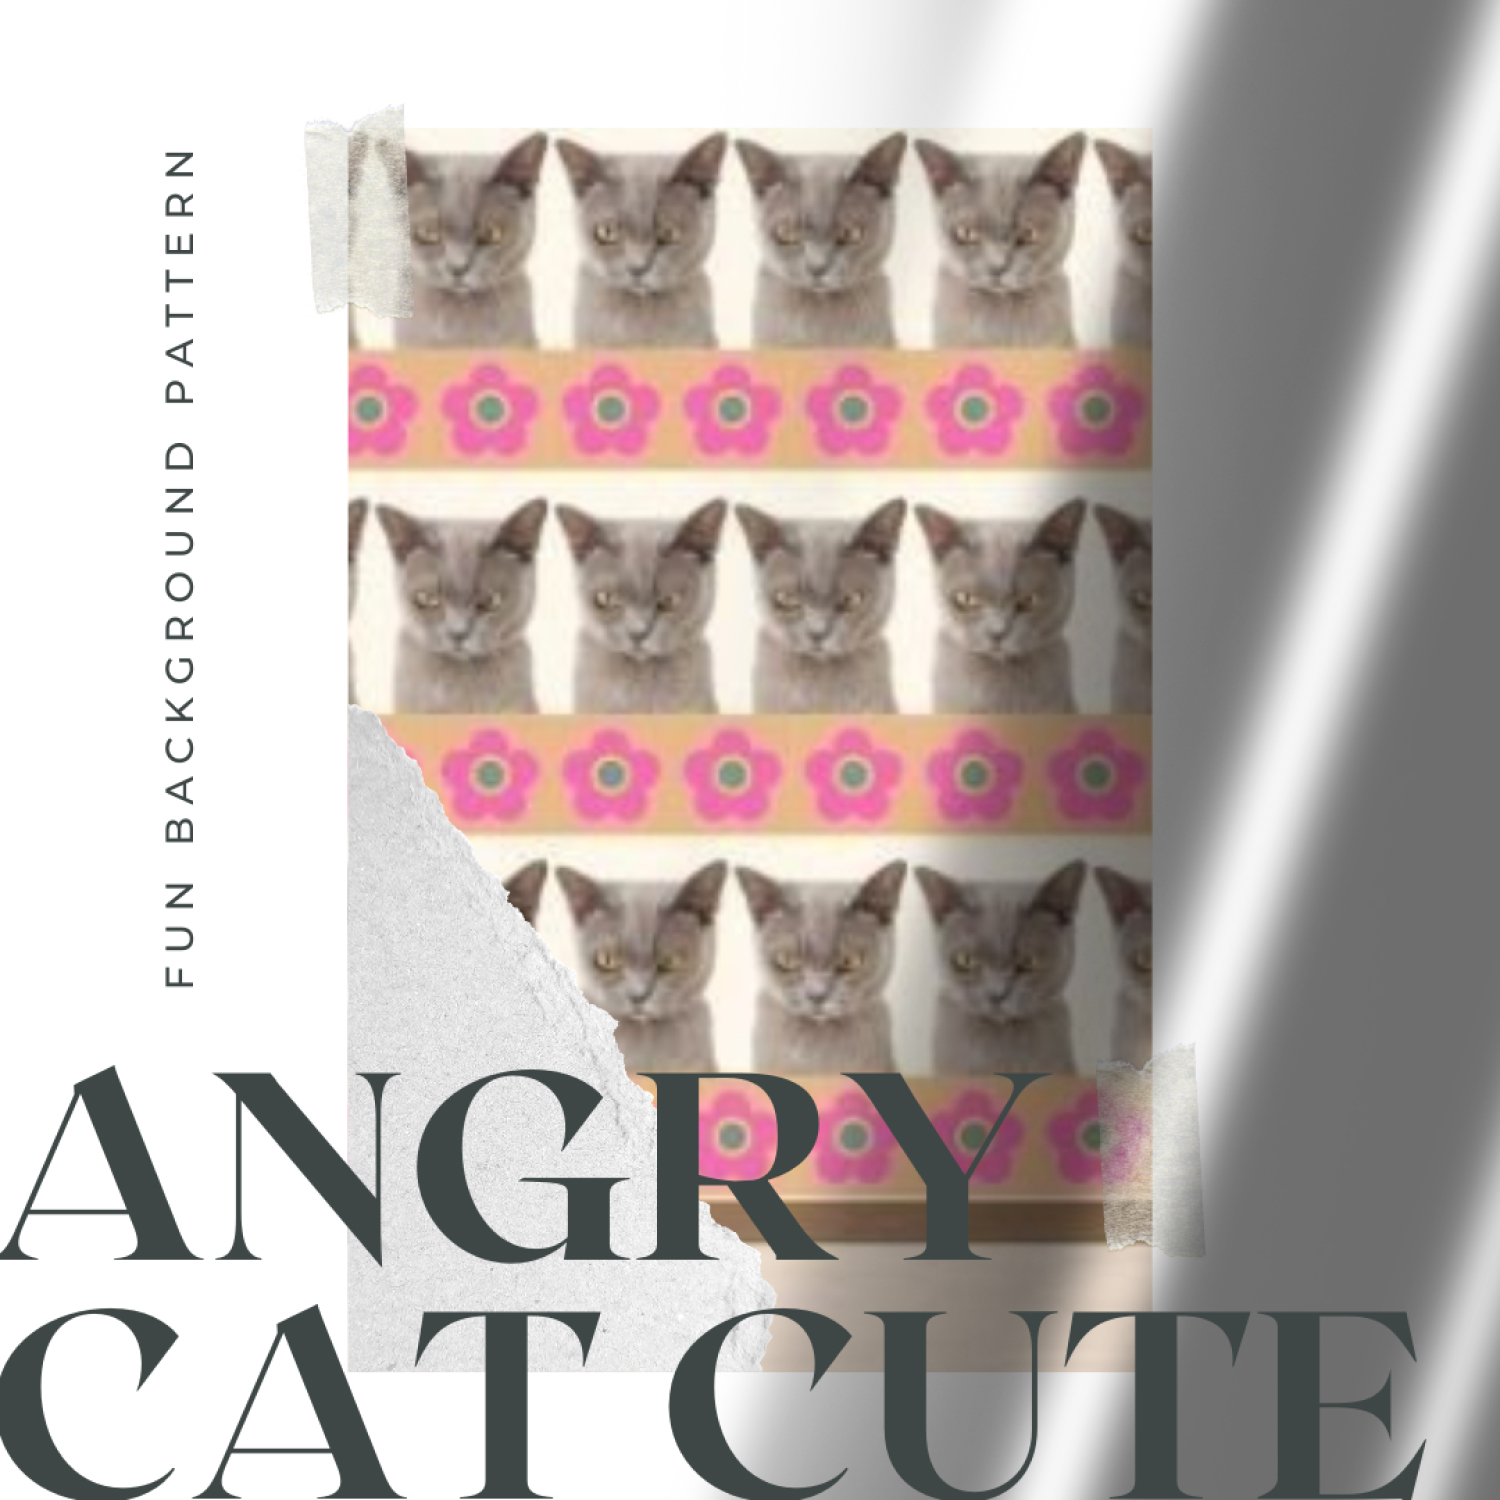 Angry Cat Cute, Fun Background Pattern.